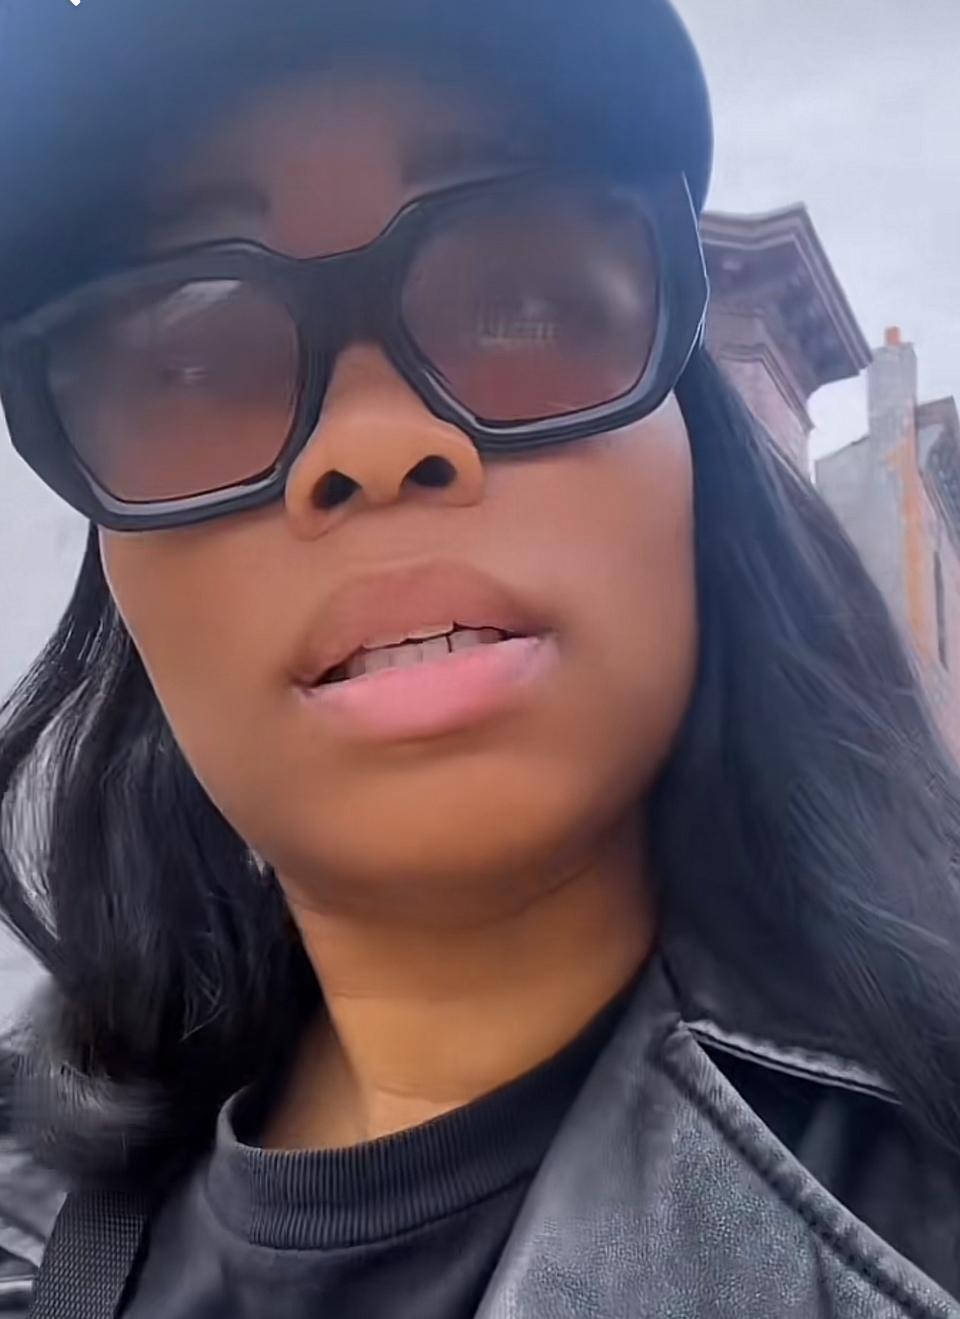 Producher_nyc on TikTok talking about the NYC Puncher